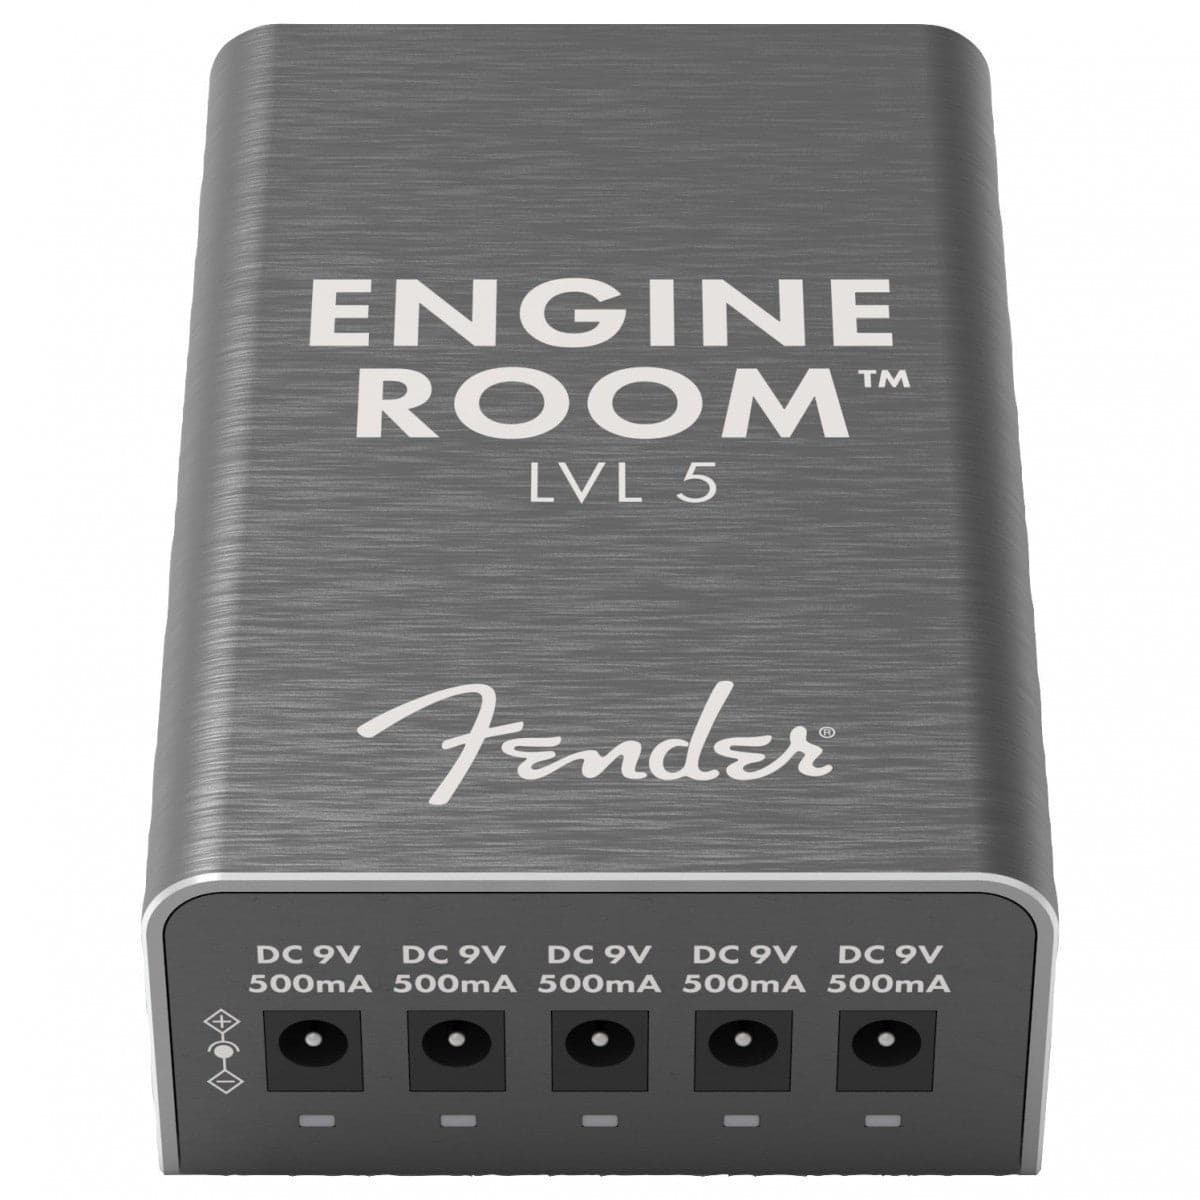 Fender Engine Room LVL8 Pedal Power Supply - Effects from Sound Affects UK